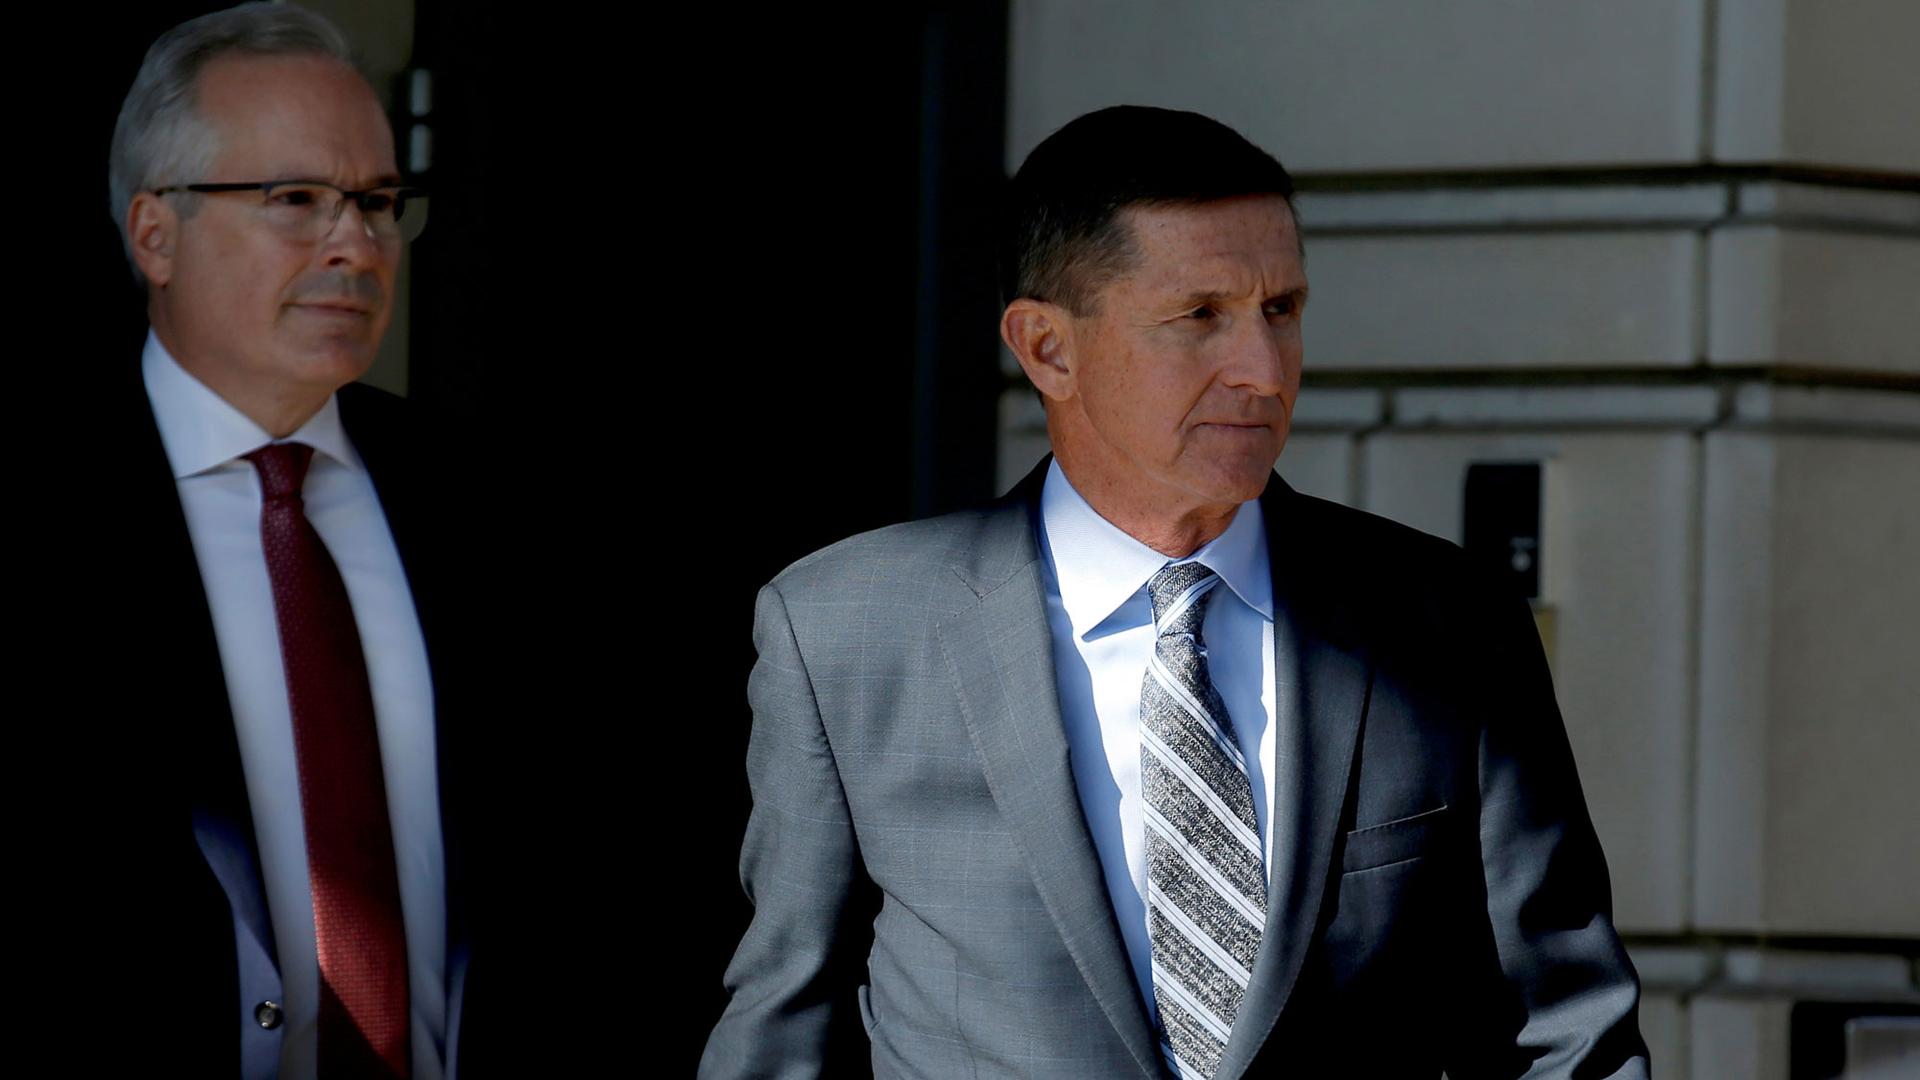 Former US National Security Adviser Michael Flynn is shown departing US District Court wearing a grey suit and striped tie.